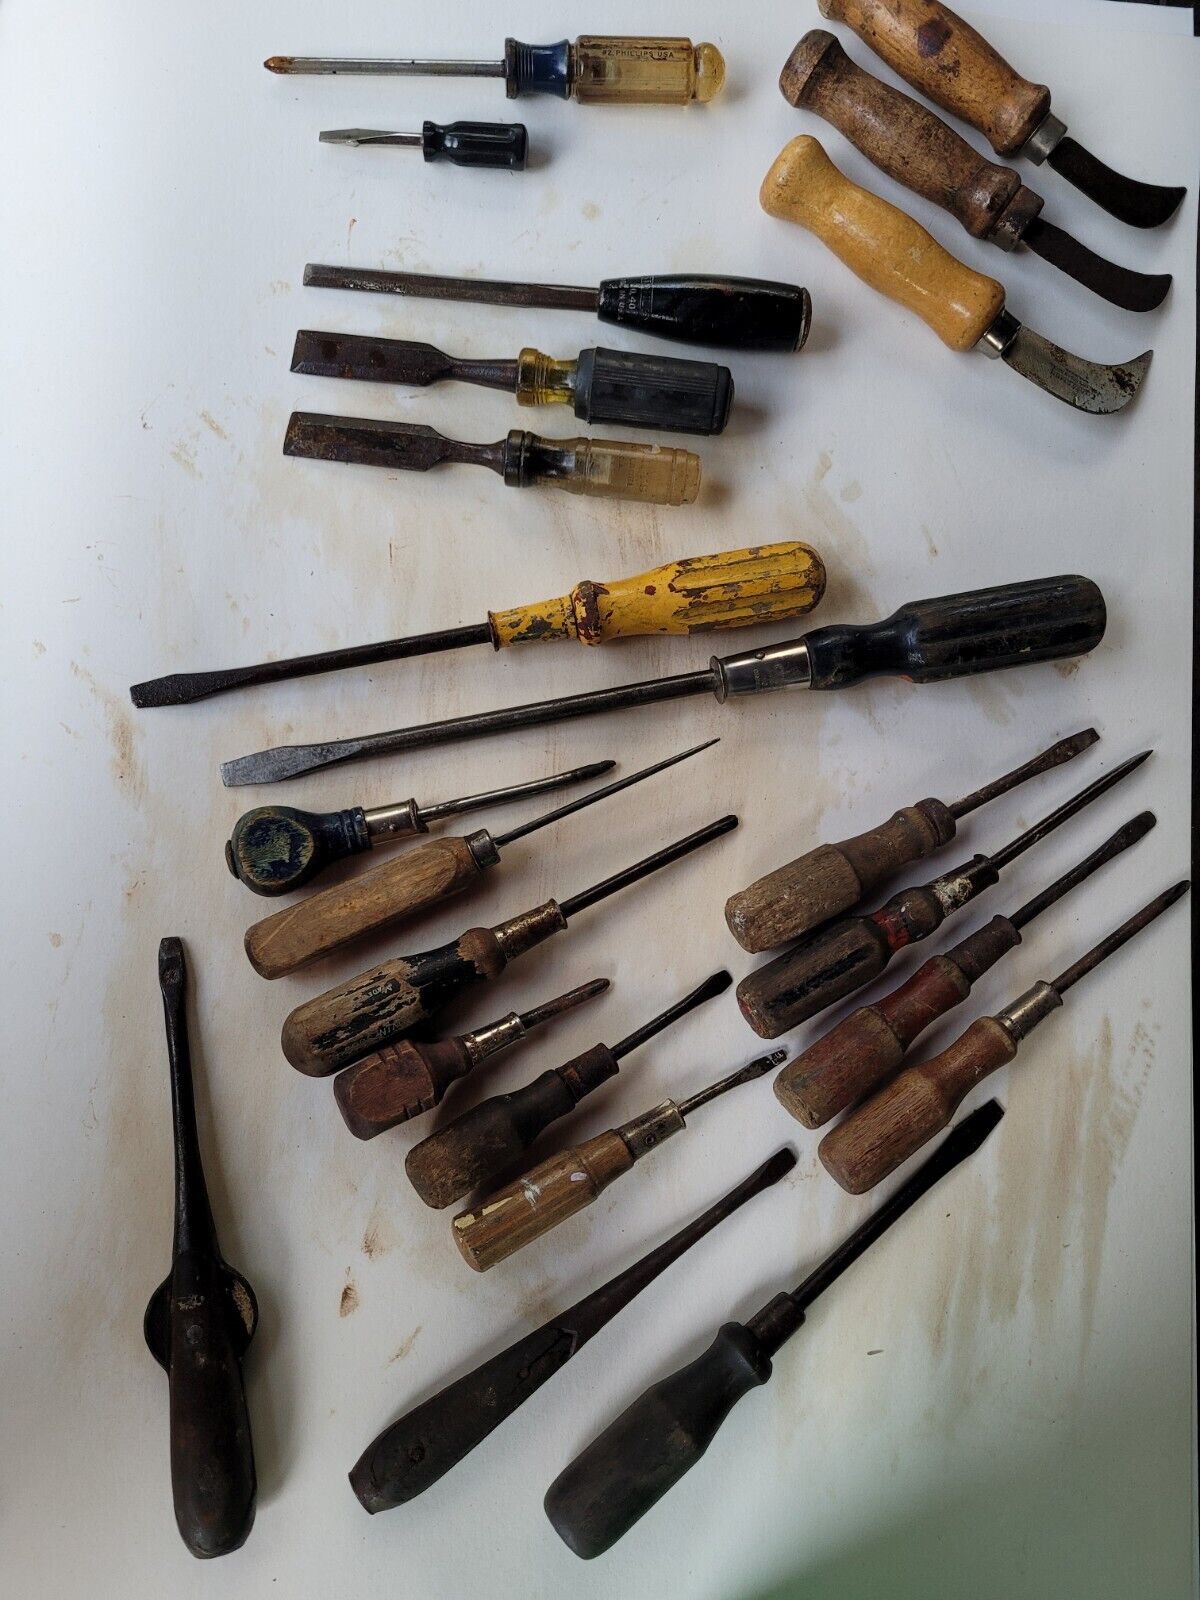 Lot Of 23 Antique Wood Handle And 1 Wing Screwdriver(s), Carpet Knifes, Chisels 